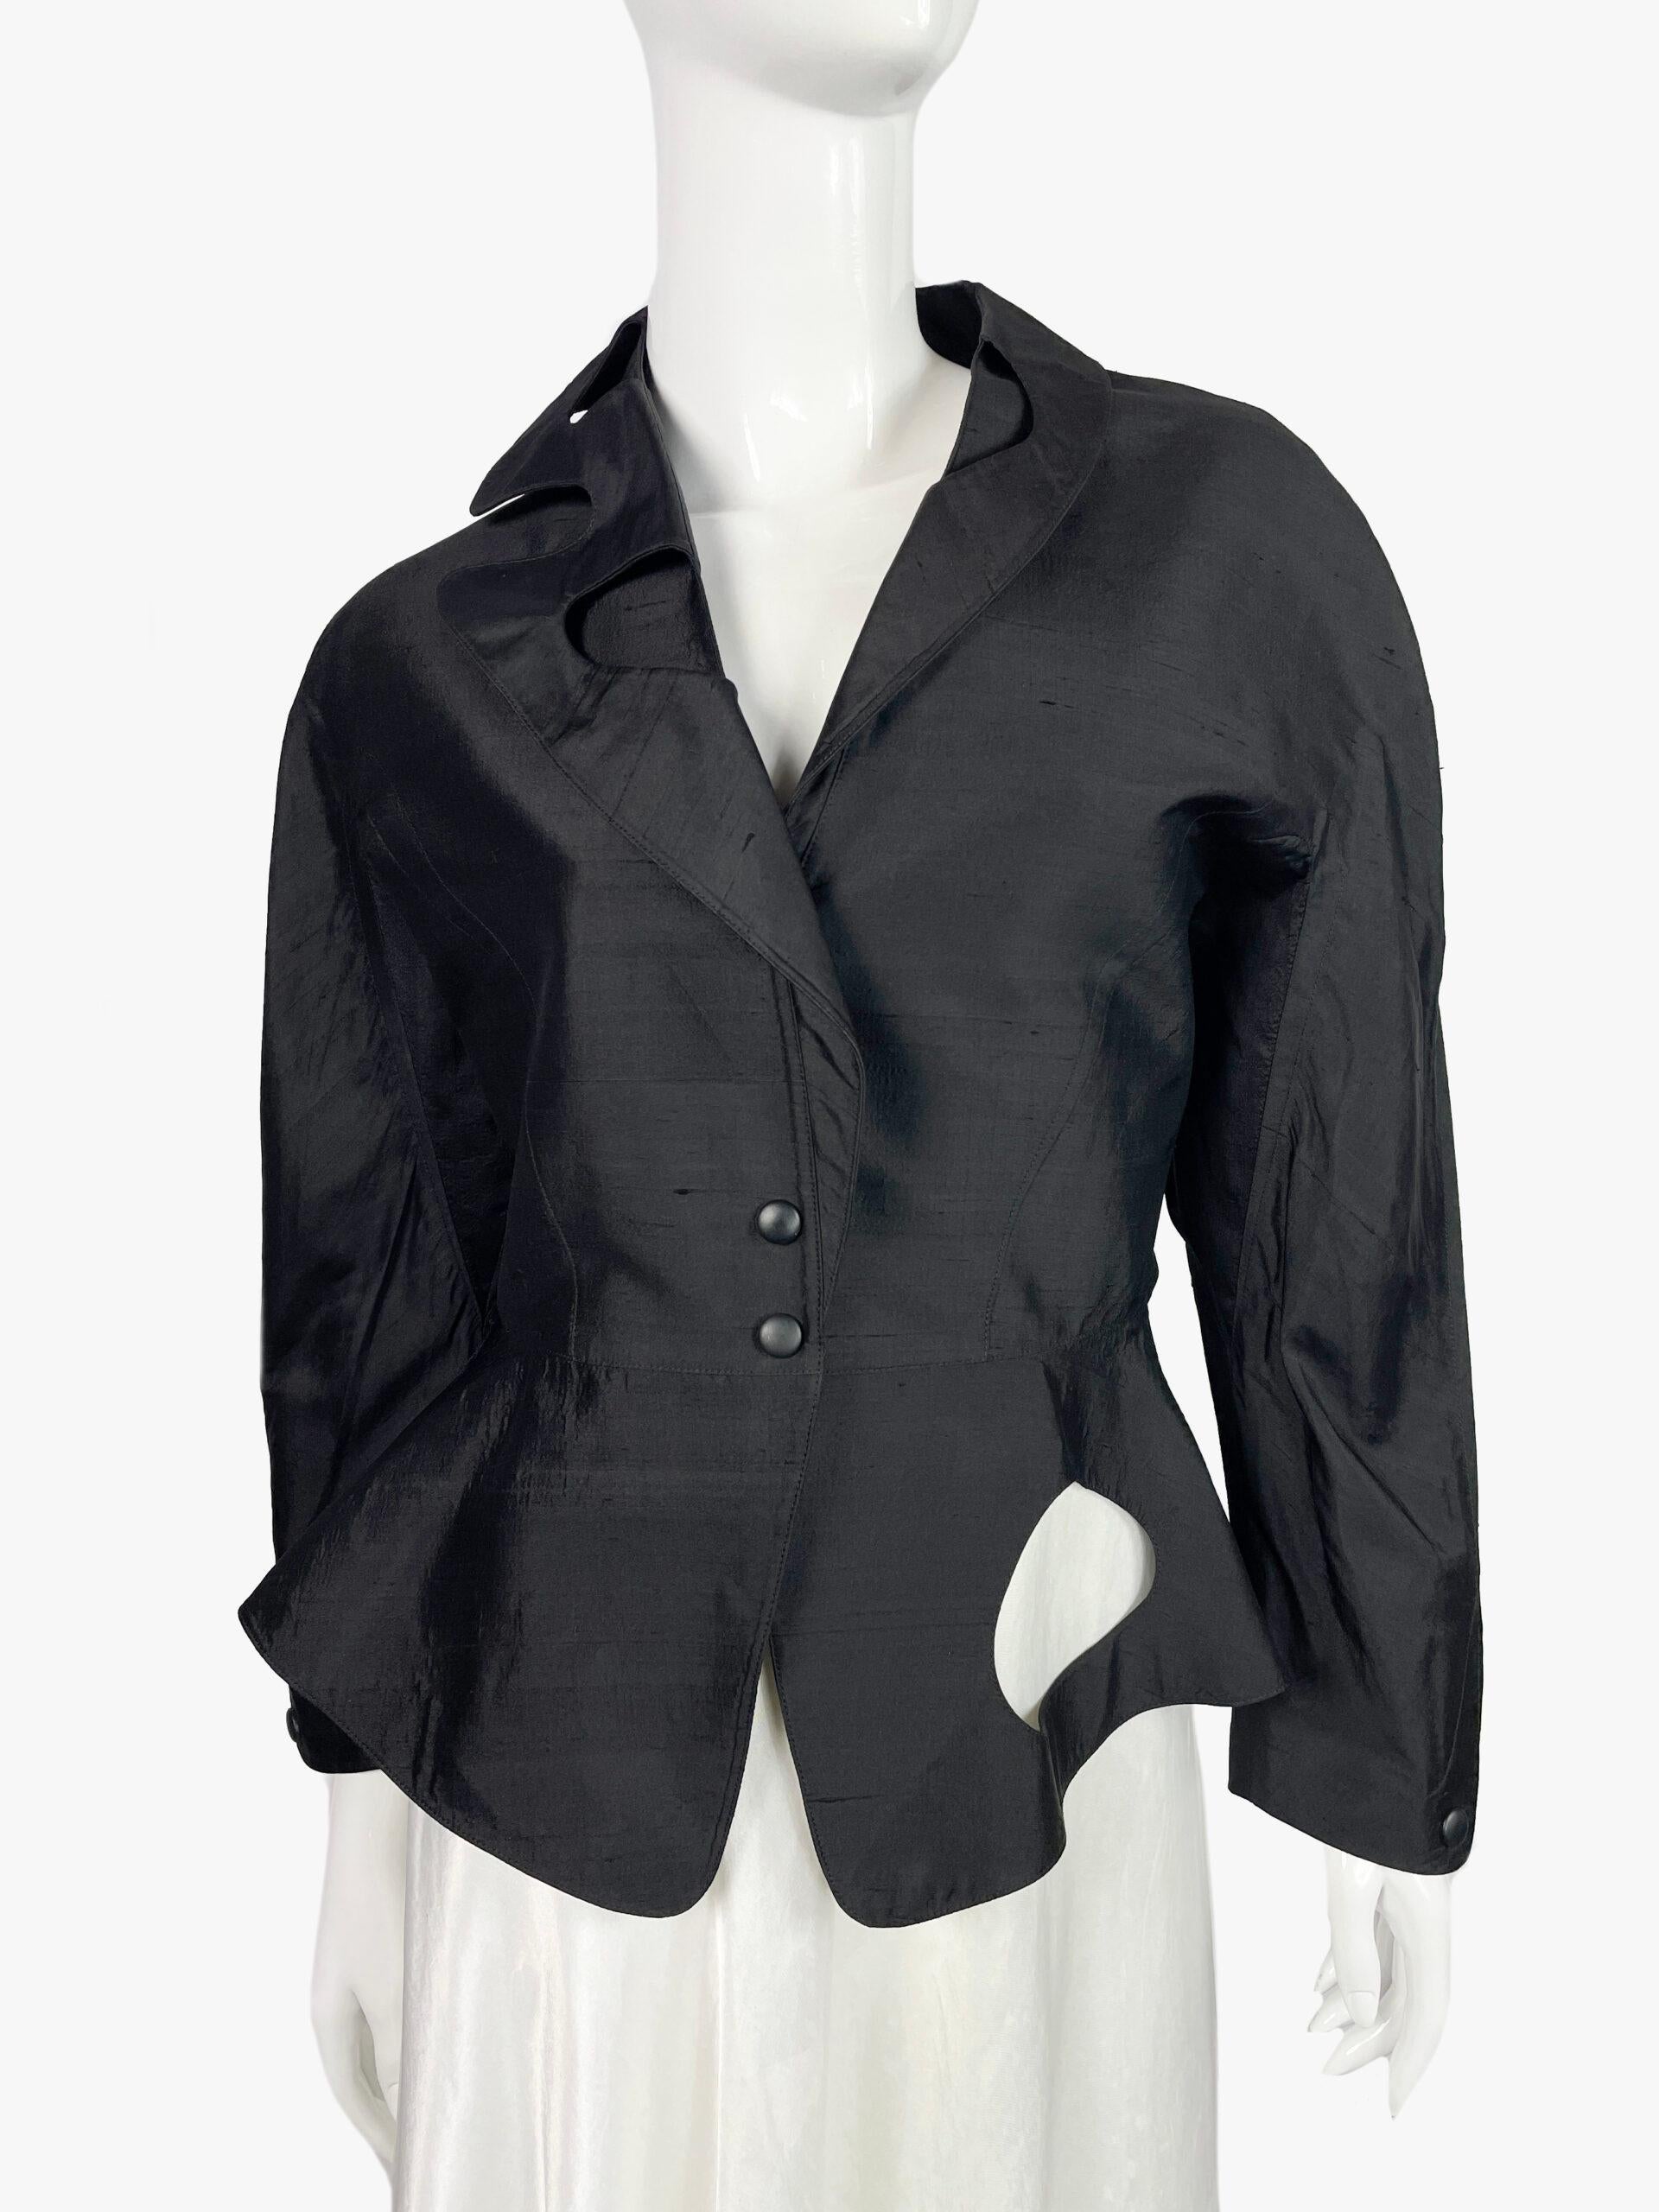 Vintage jacket by French couturier Thierry Mugler. 
V-shaped collar, fastens with 2 buttons
Period: 1990s
The main composition tag is missing, but there is a small inner tag that says it is 100% silk.
Size: 42/ L
Condition: Very good